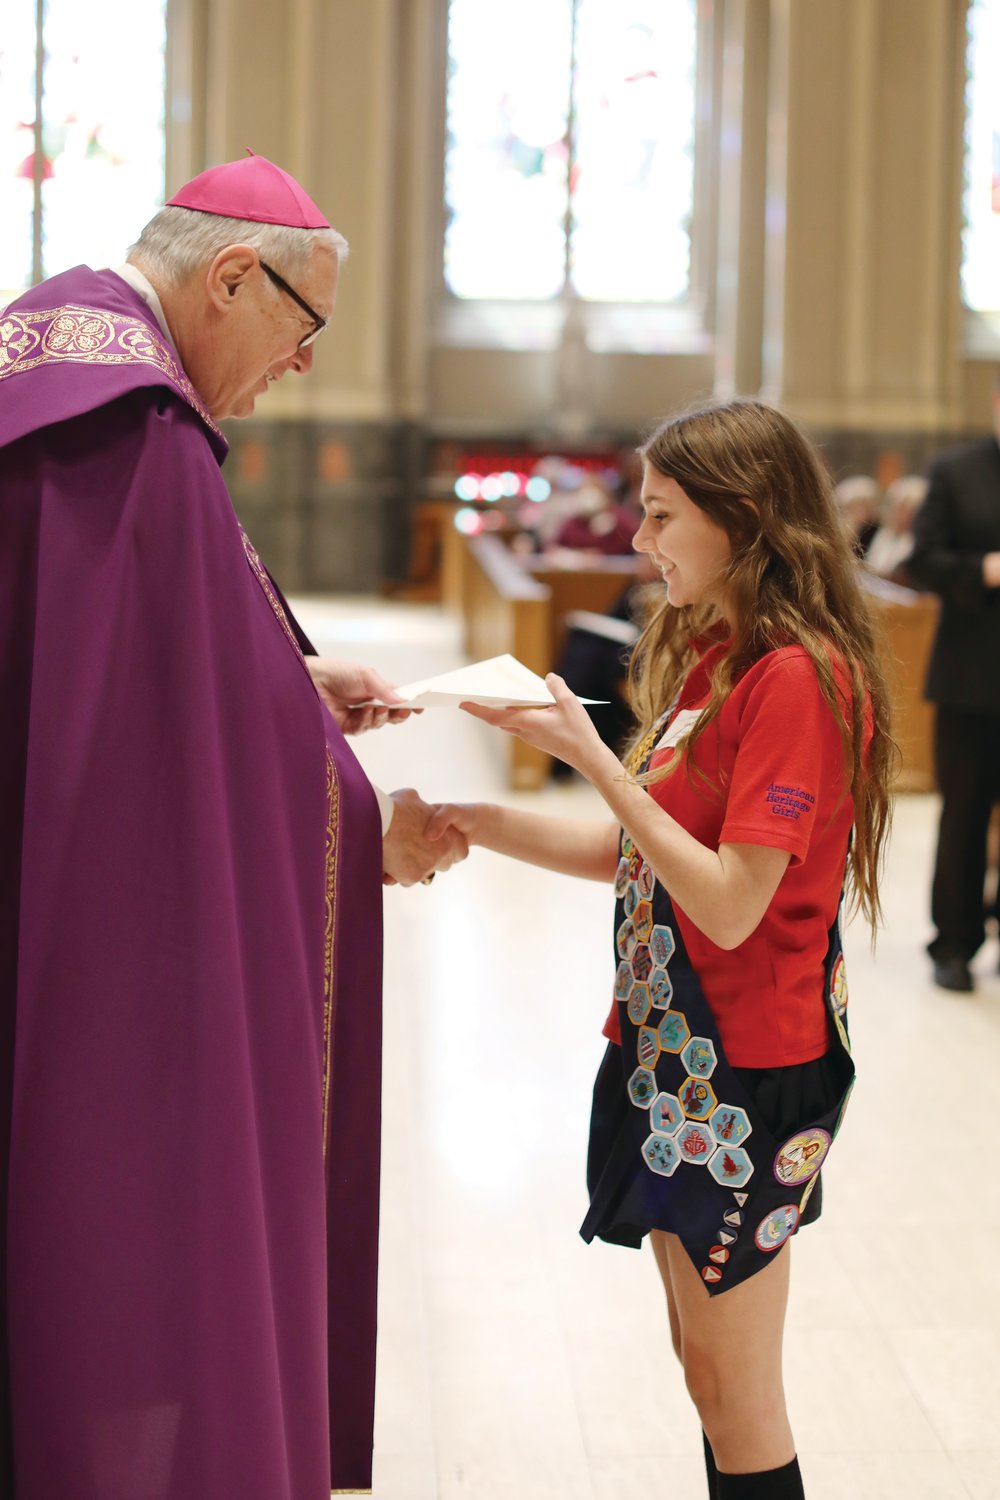 Local youth and adult volunteers were honored at this year’s diocesan Catholic Youth Ministry and Scout Awards, held at the Cathedral of SS. Peter and Paul on Sunday, March 13. At right, American Heritage Girl Amanda Abbott, of SS. Rose and Clement, Warwick, was the recipient of the 2022 Pillars of Faith Award, which recognizes Scouts who earn all four National Catholic Religious Scouting Awards: The Family of God; I Live My Faith; Mary, the First Disciple; and The Spirit Alive.